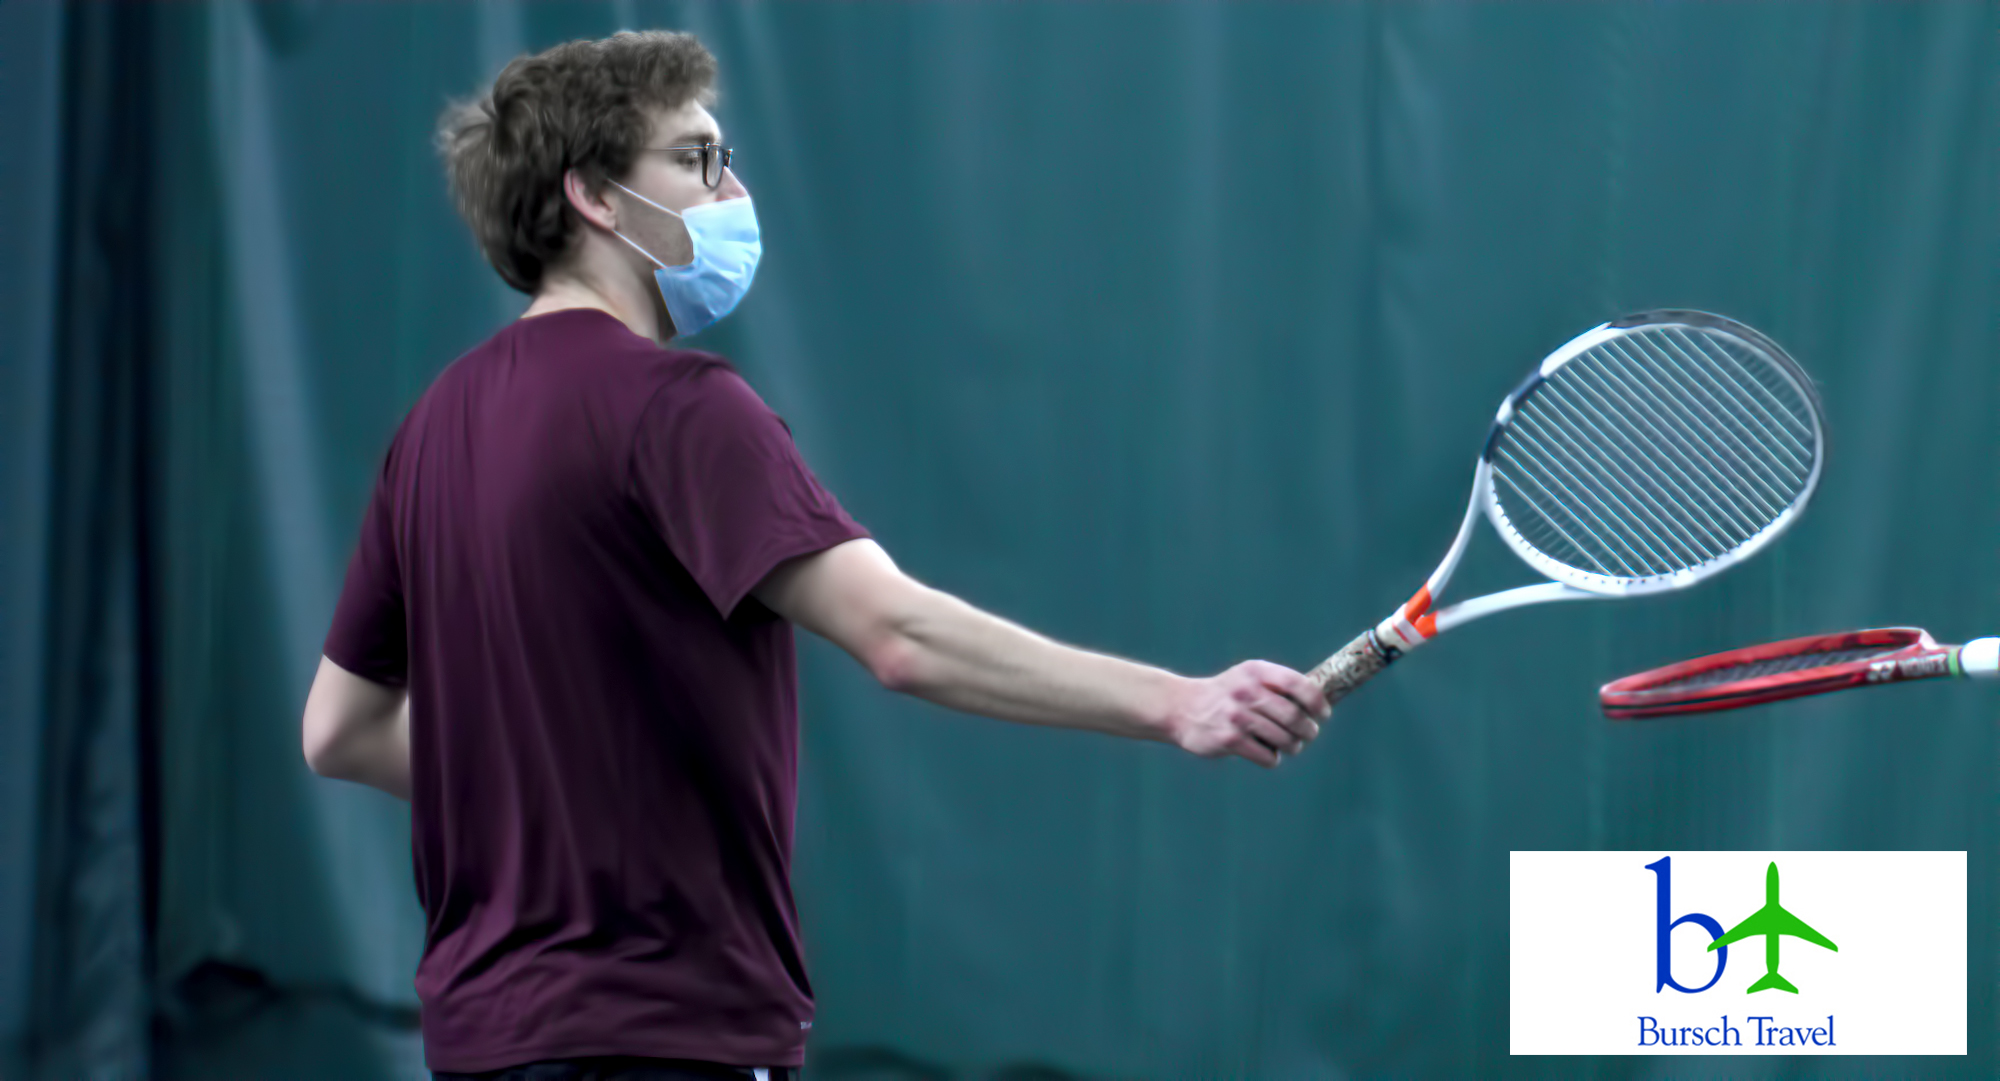 Senior Jake Peters won his No.6 singles match 6-2, 6-0 in the Cobbers' match against St. Scholastica. It was his second straight victory and eighth in his career in maroon and gold.